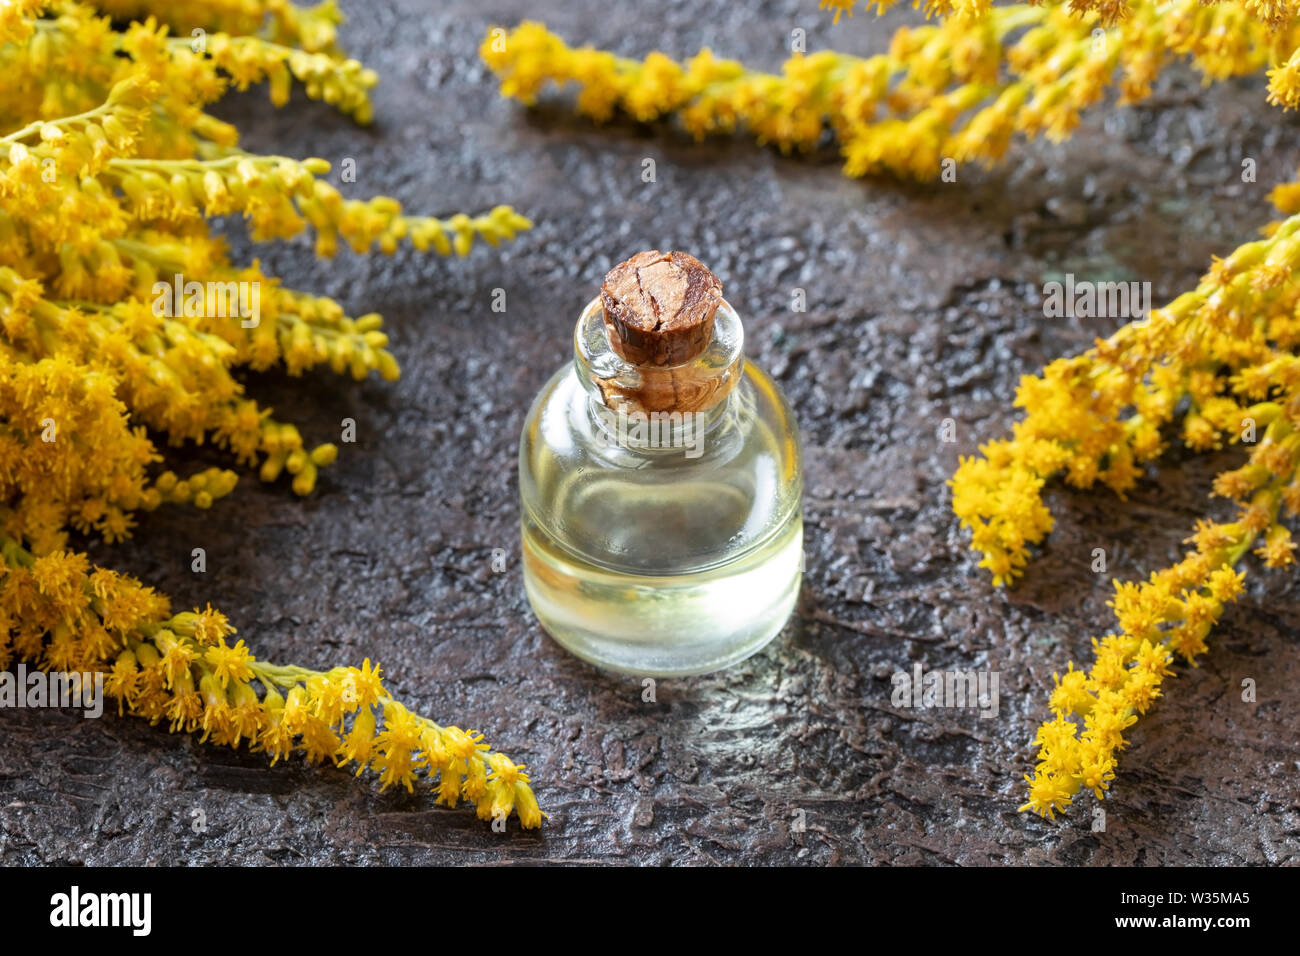 A bottle of Canadian goldenrod essential oil with fresh Solidago canadensis plant Stock Photo